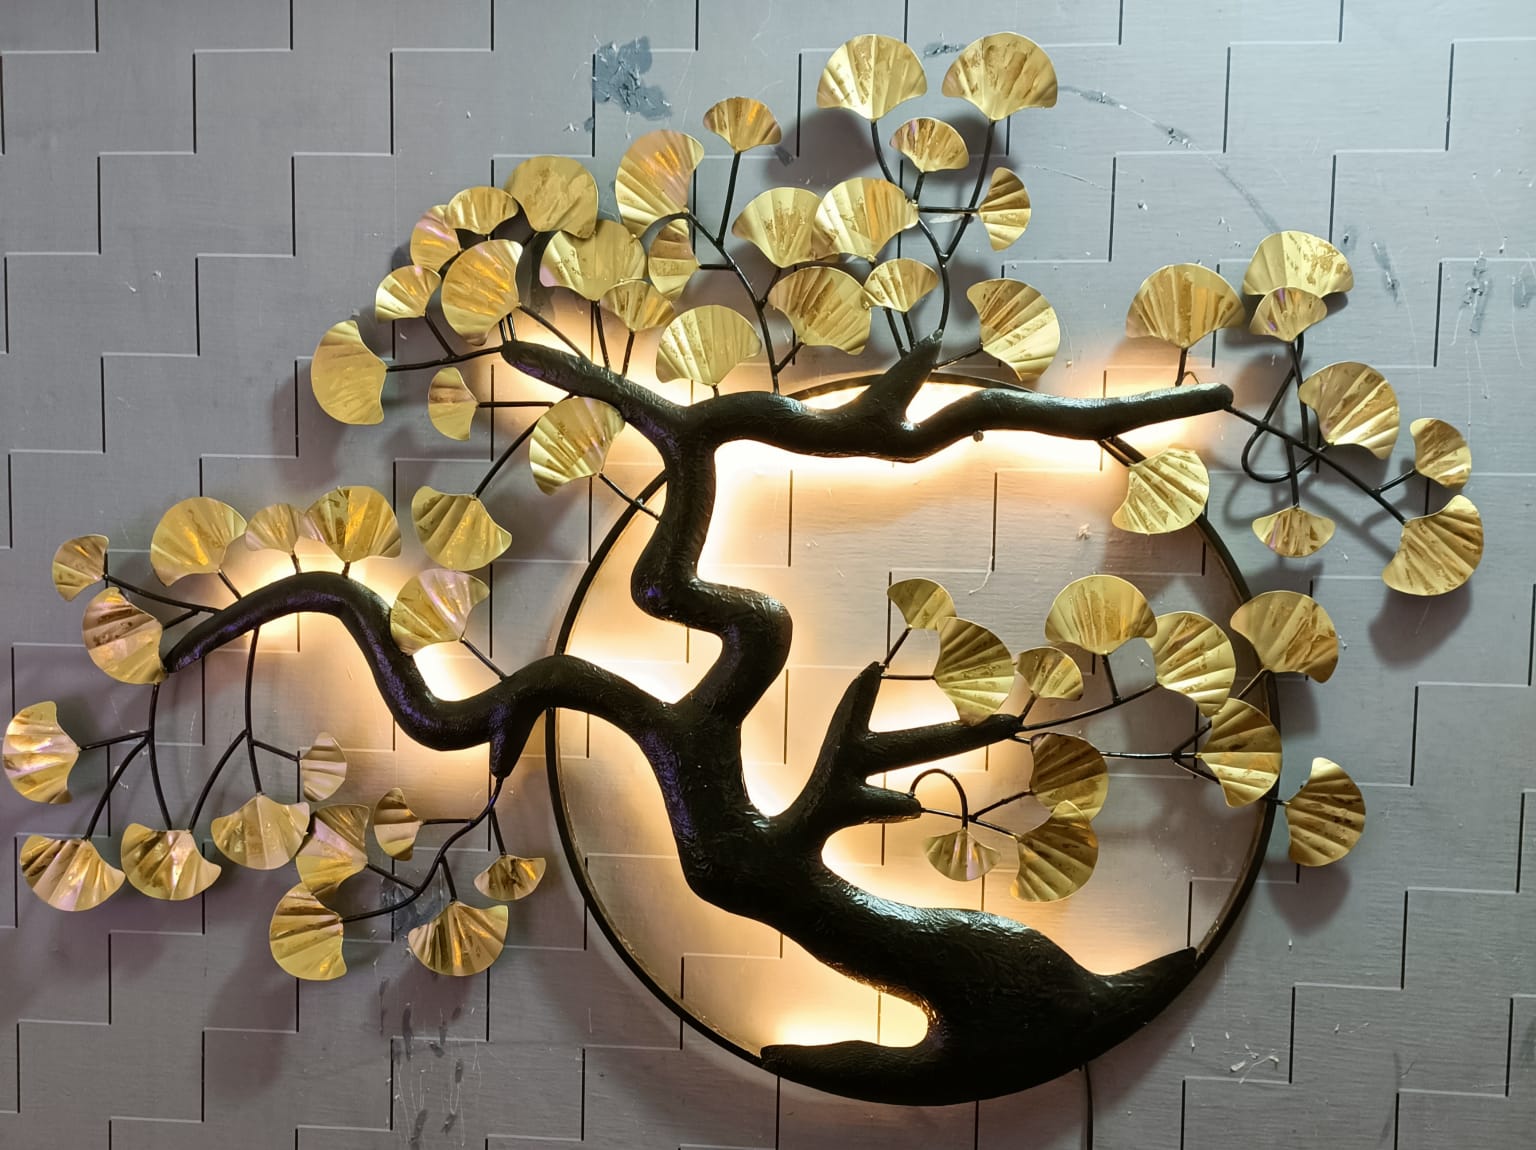 Metal Tree Wall Hanging Decor With LED Light, Wall Decor Tree With